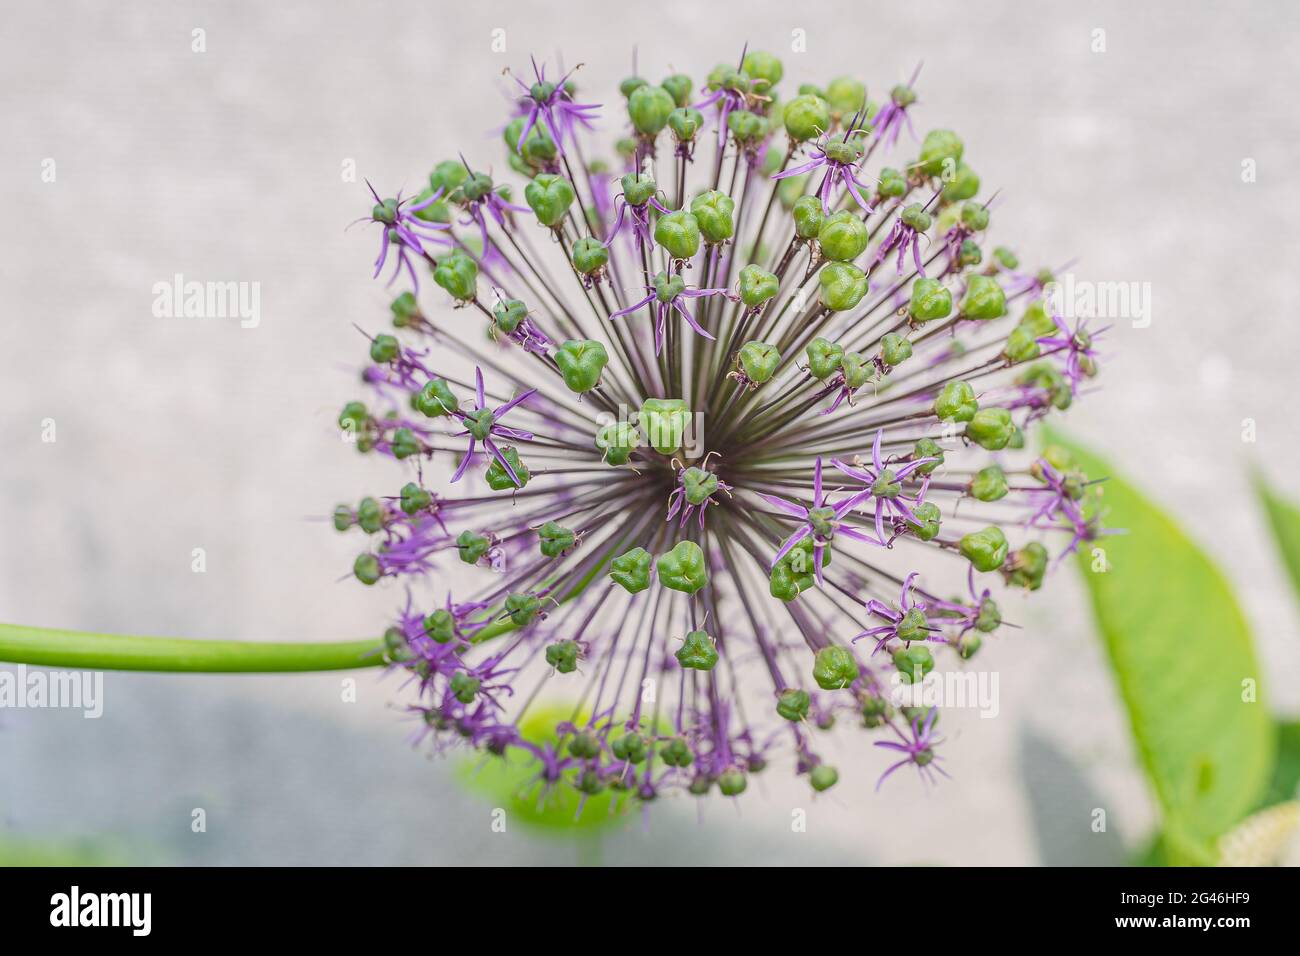 multi-colored alliums. Long spherical flowers in white and purple. Summer nature. Flowers against the sky Beautiful field of flowers. Photo of flowers Stock Photo